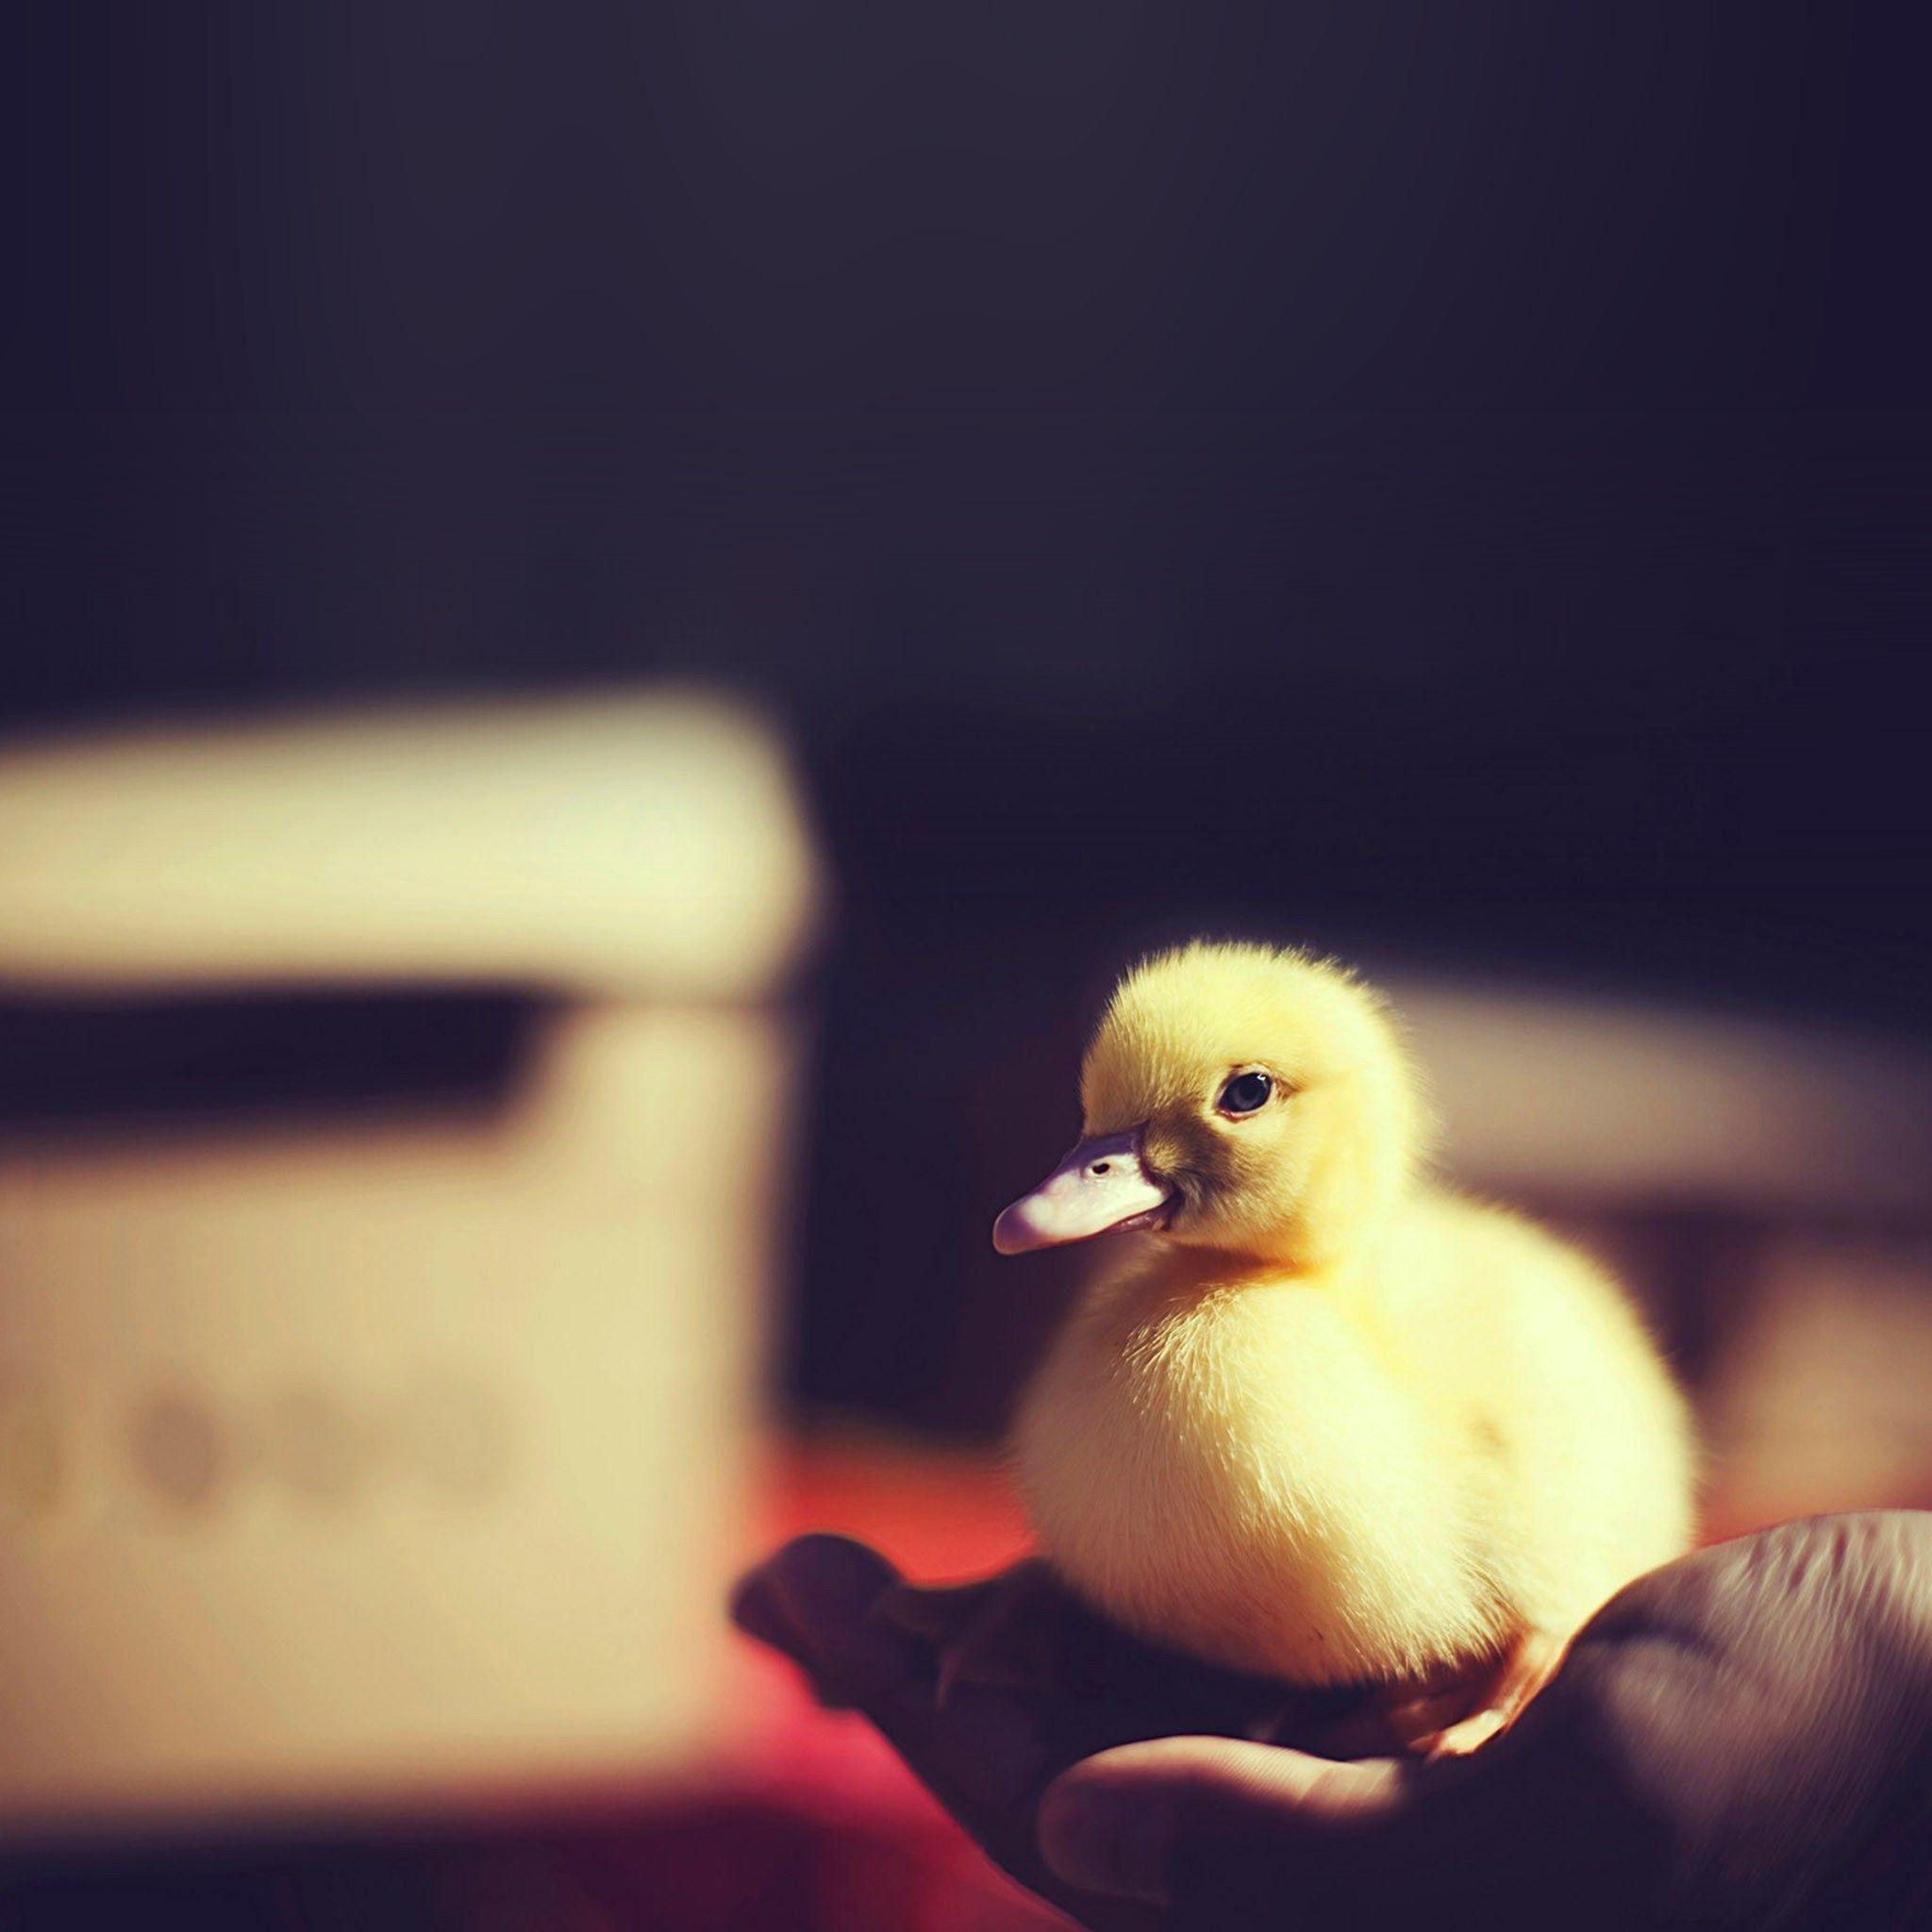 Cute duck to see more cute animals that will make you go 'Aww